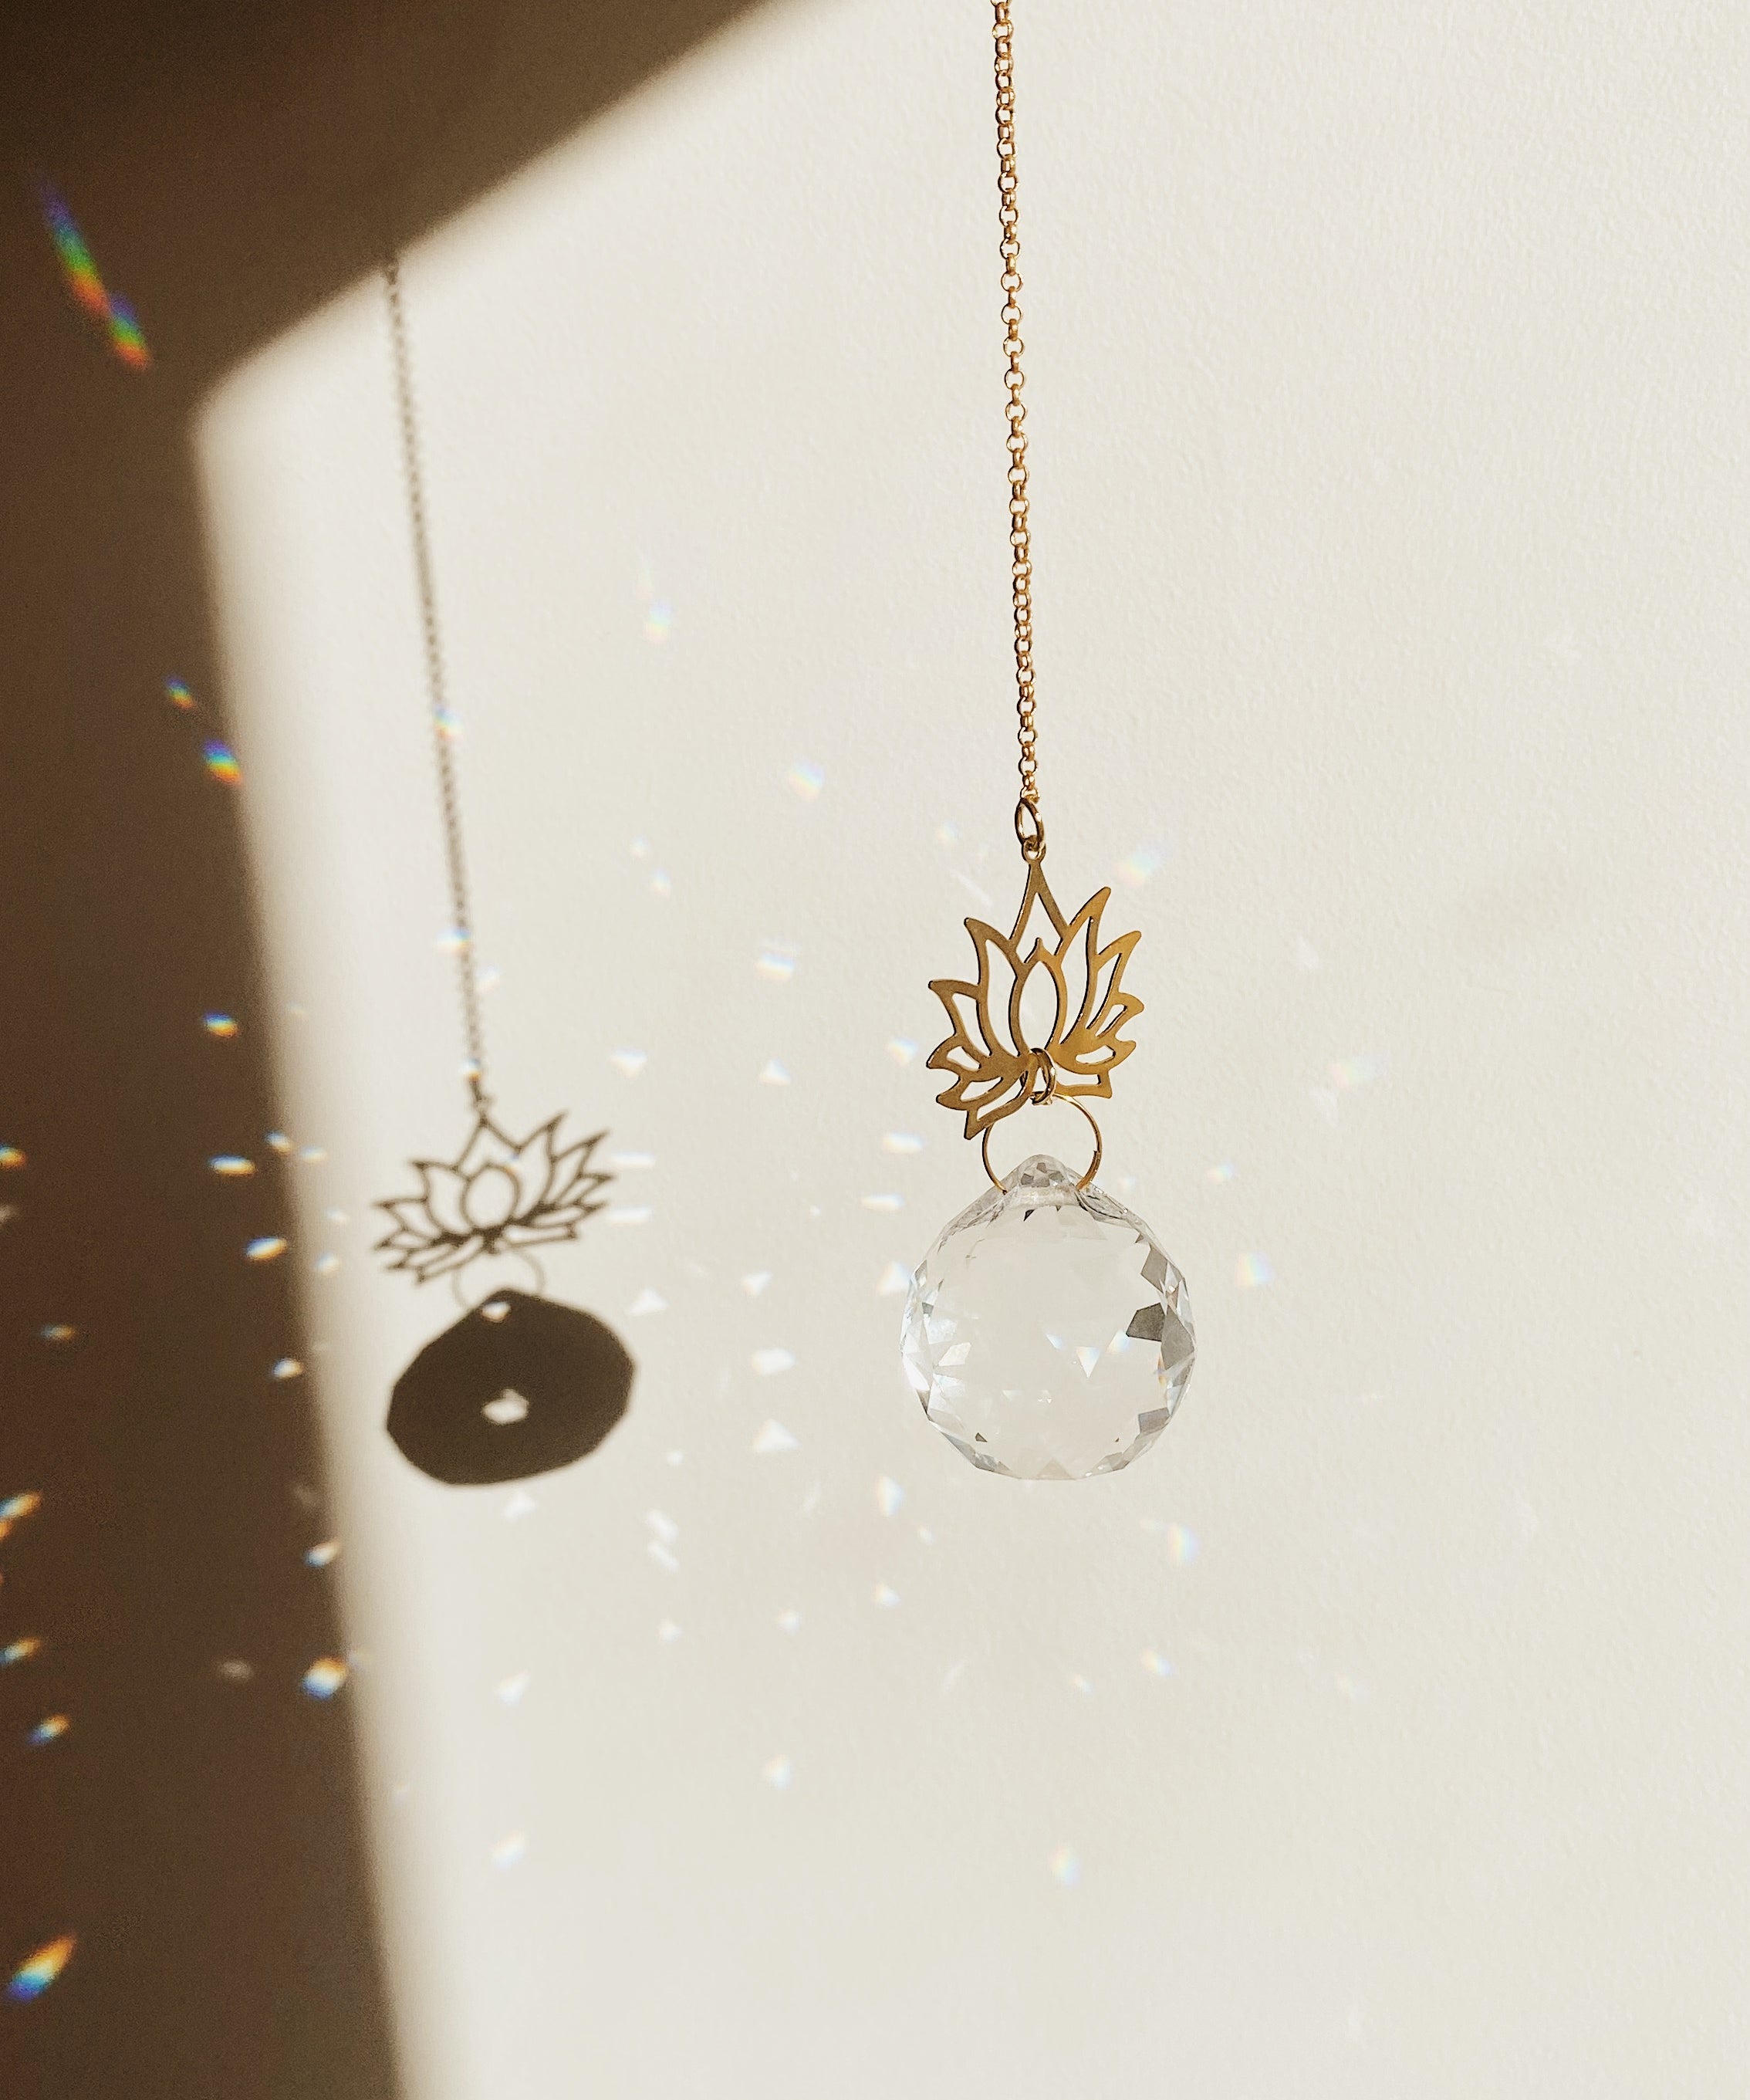 Crystal Suncatcher crafted with brass hanging - Grounding